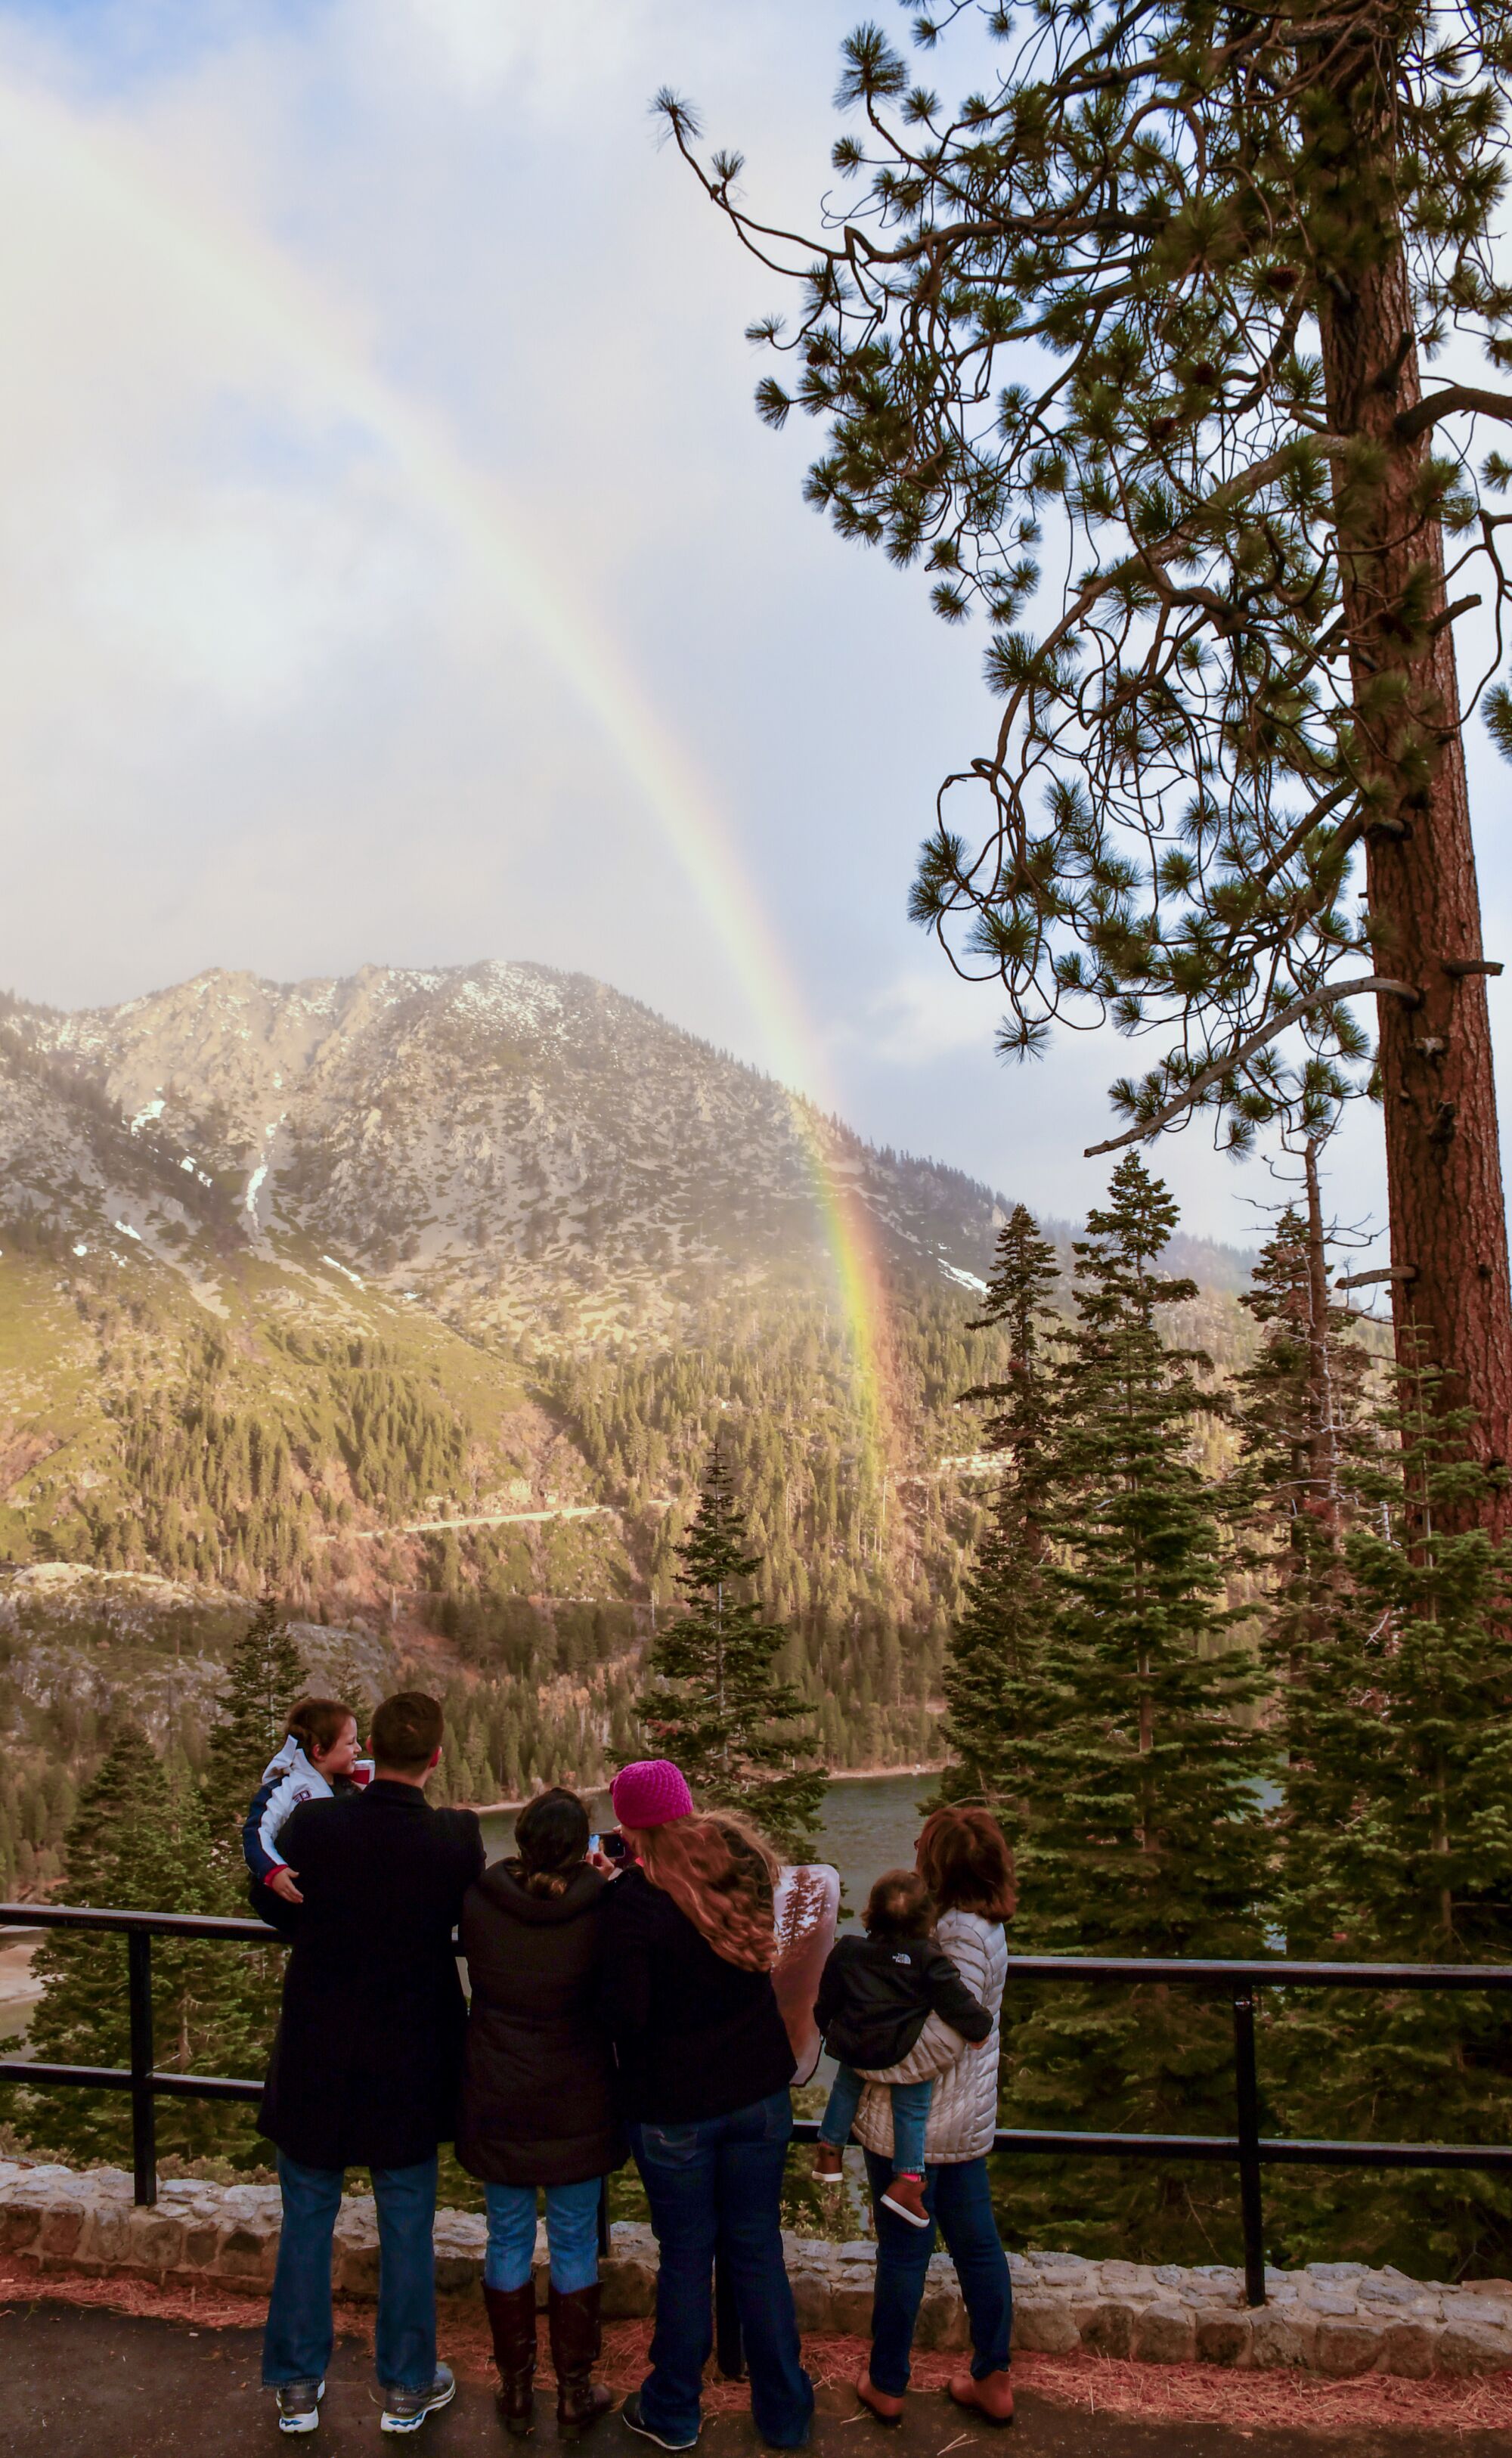 Sunrise over Lake Tahoe's Emerald Bay sometimes comes with billowing clouds and rainbows.